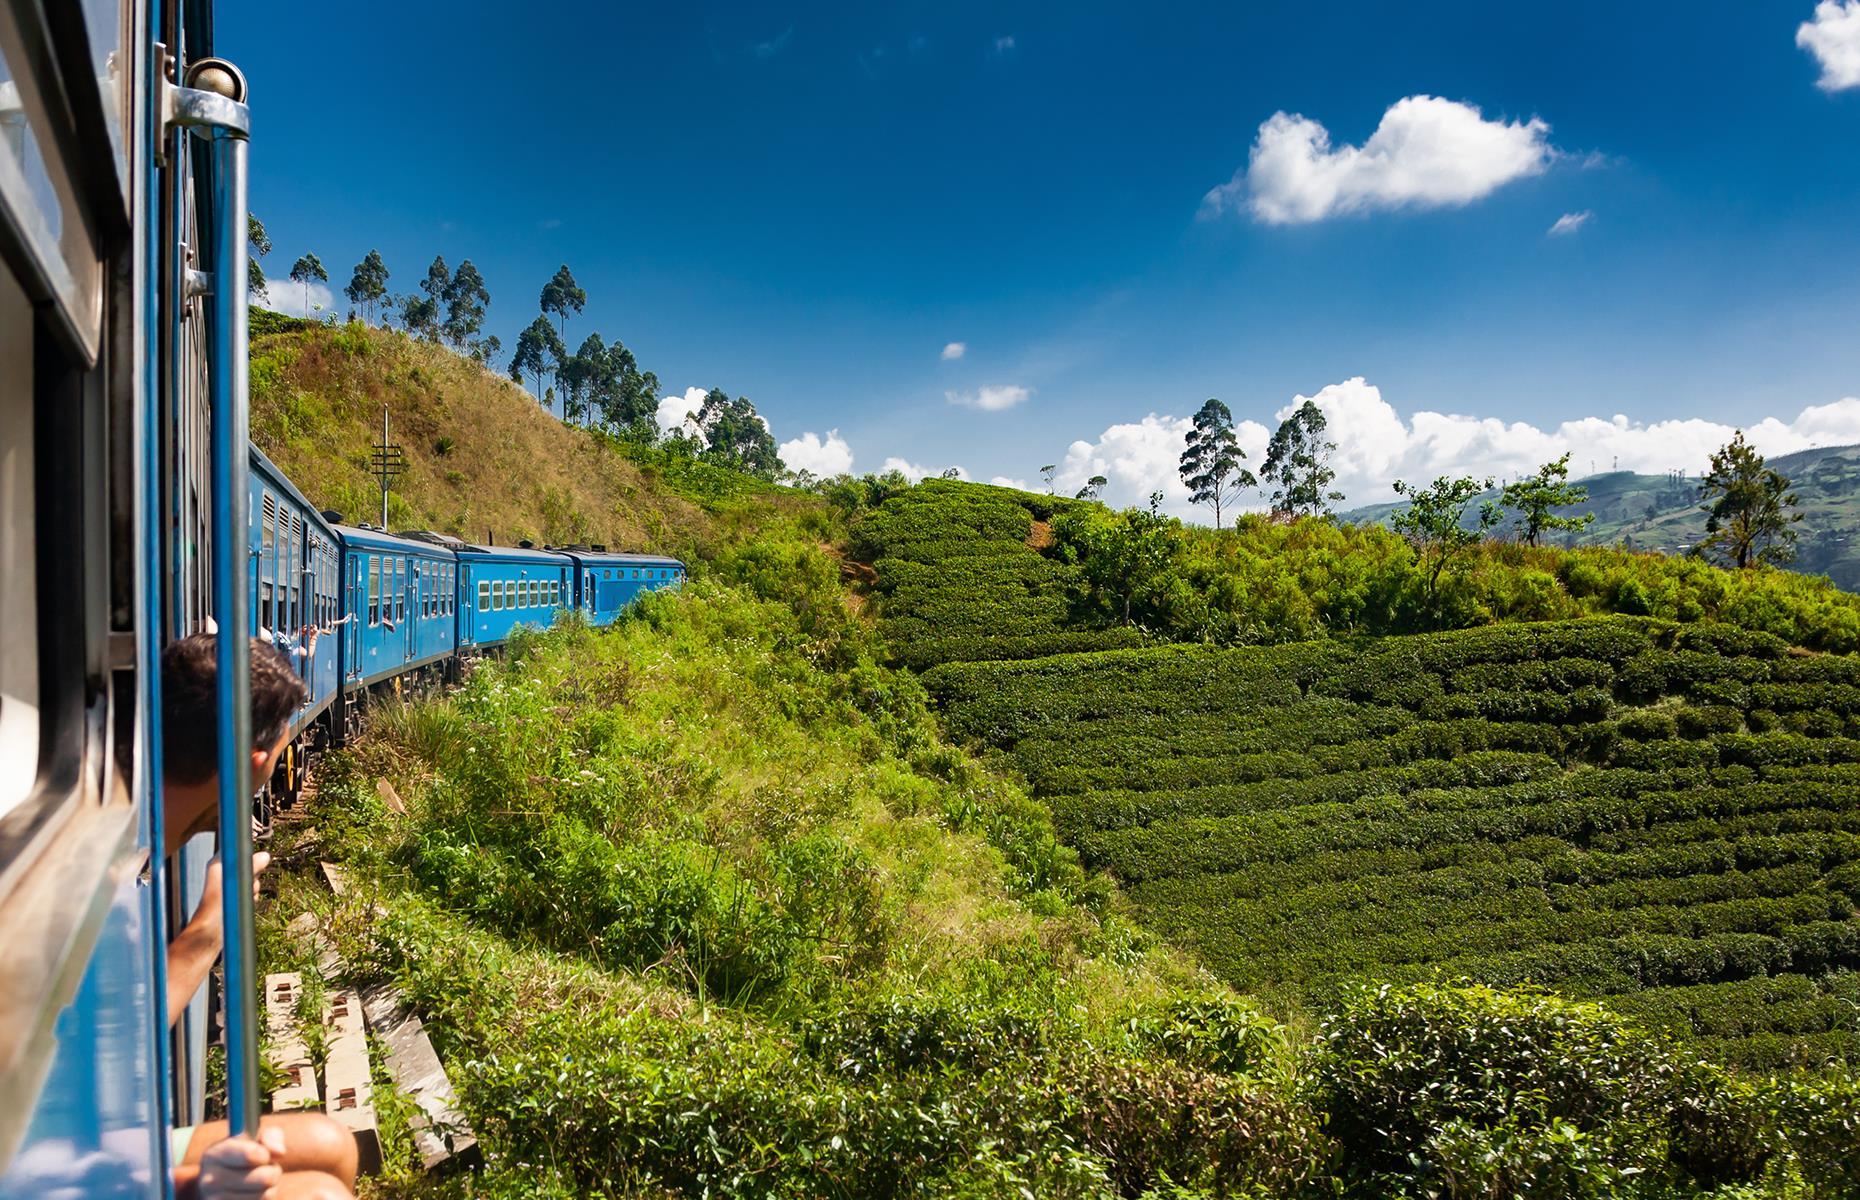 Built by the British in the late 1800s, Sri Lanka's rail system was originally used to transport tea and coffee for export so it's no surprise that this seven-hour trip takes passengers through stunning tea plantations, remote villages, lush green hills and tumbling waterfalls. If traveling from Kandy, know that the better views are from the seats on the right.